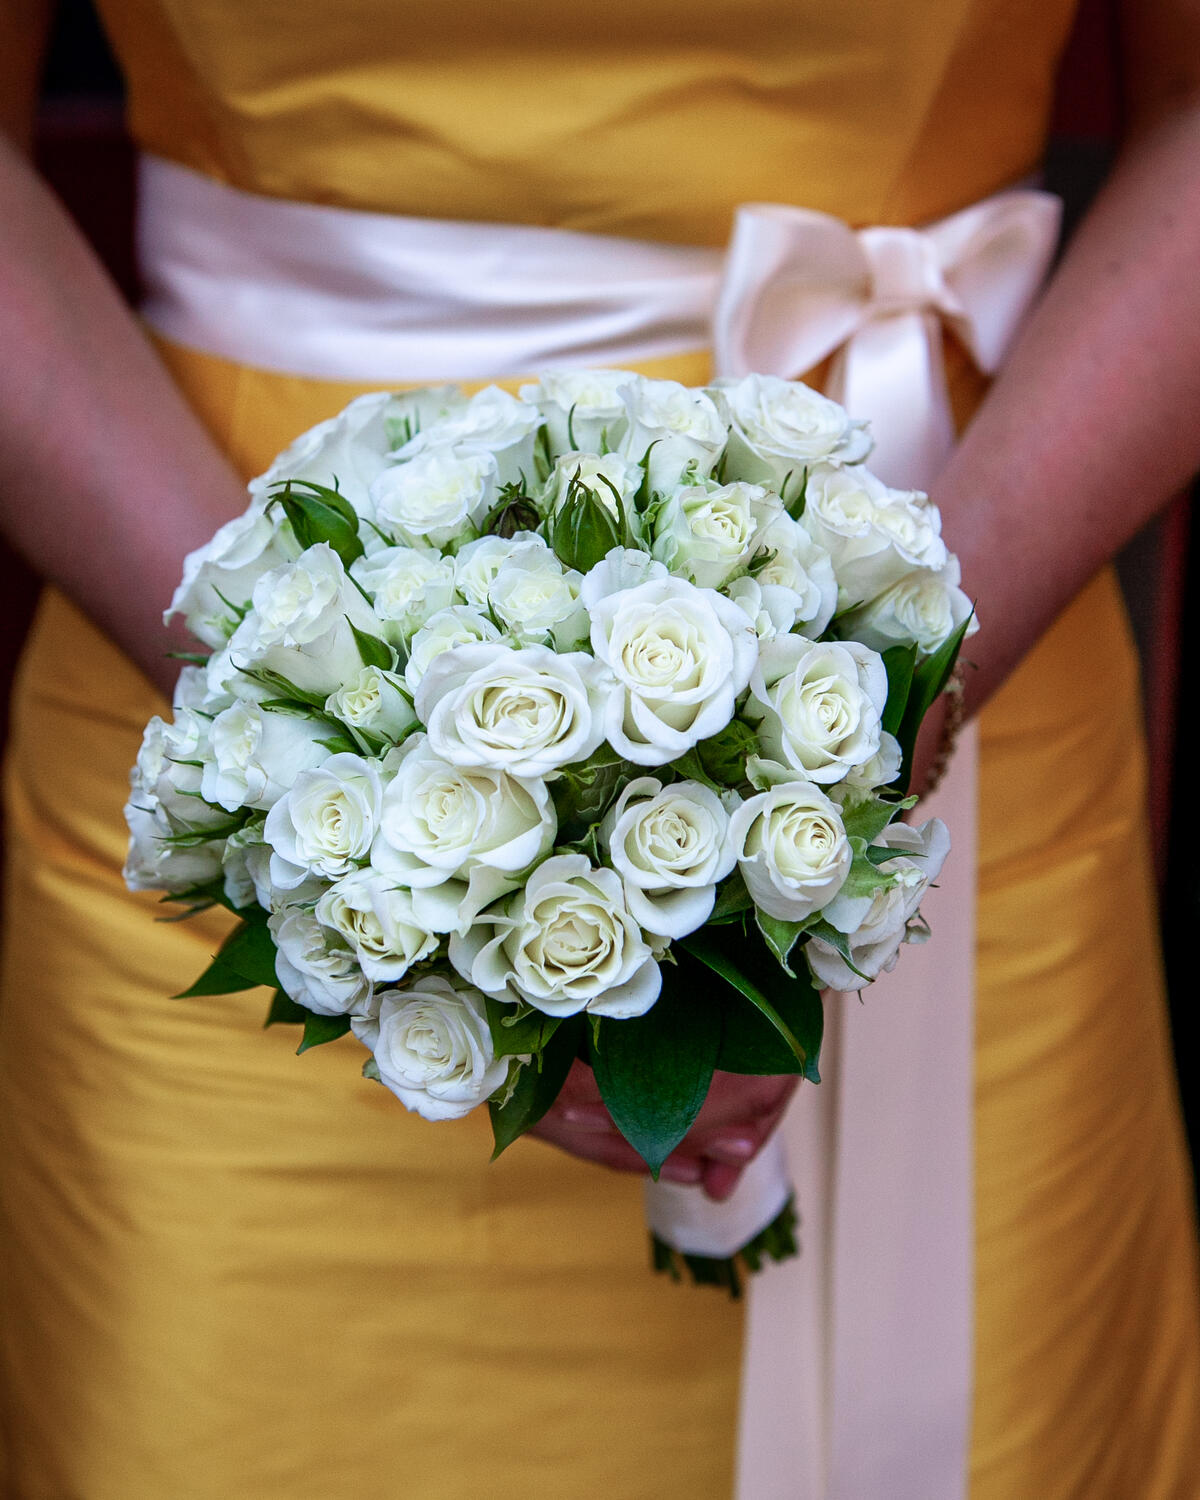 Beautiful wedding bouquet of white roses